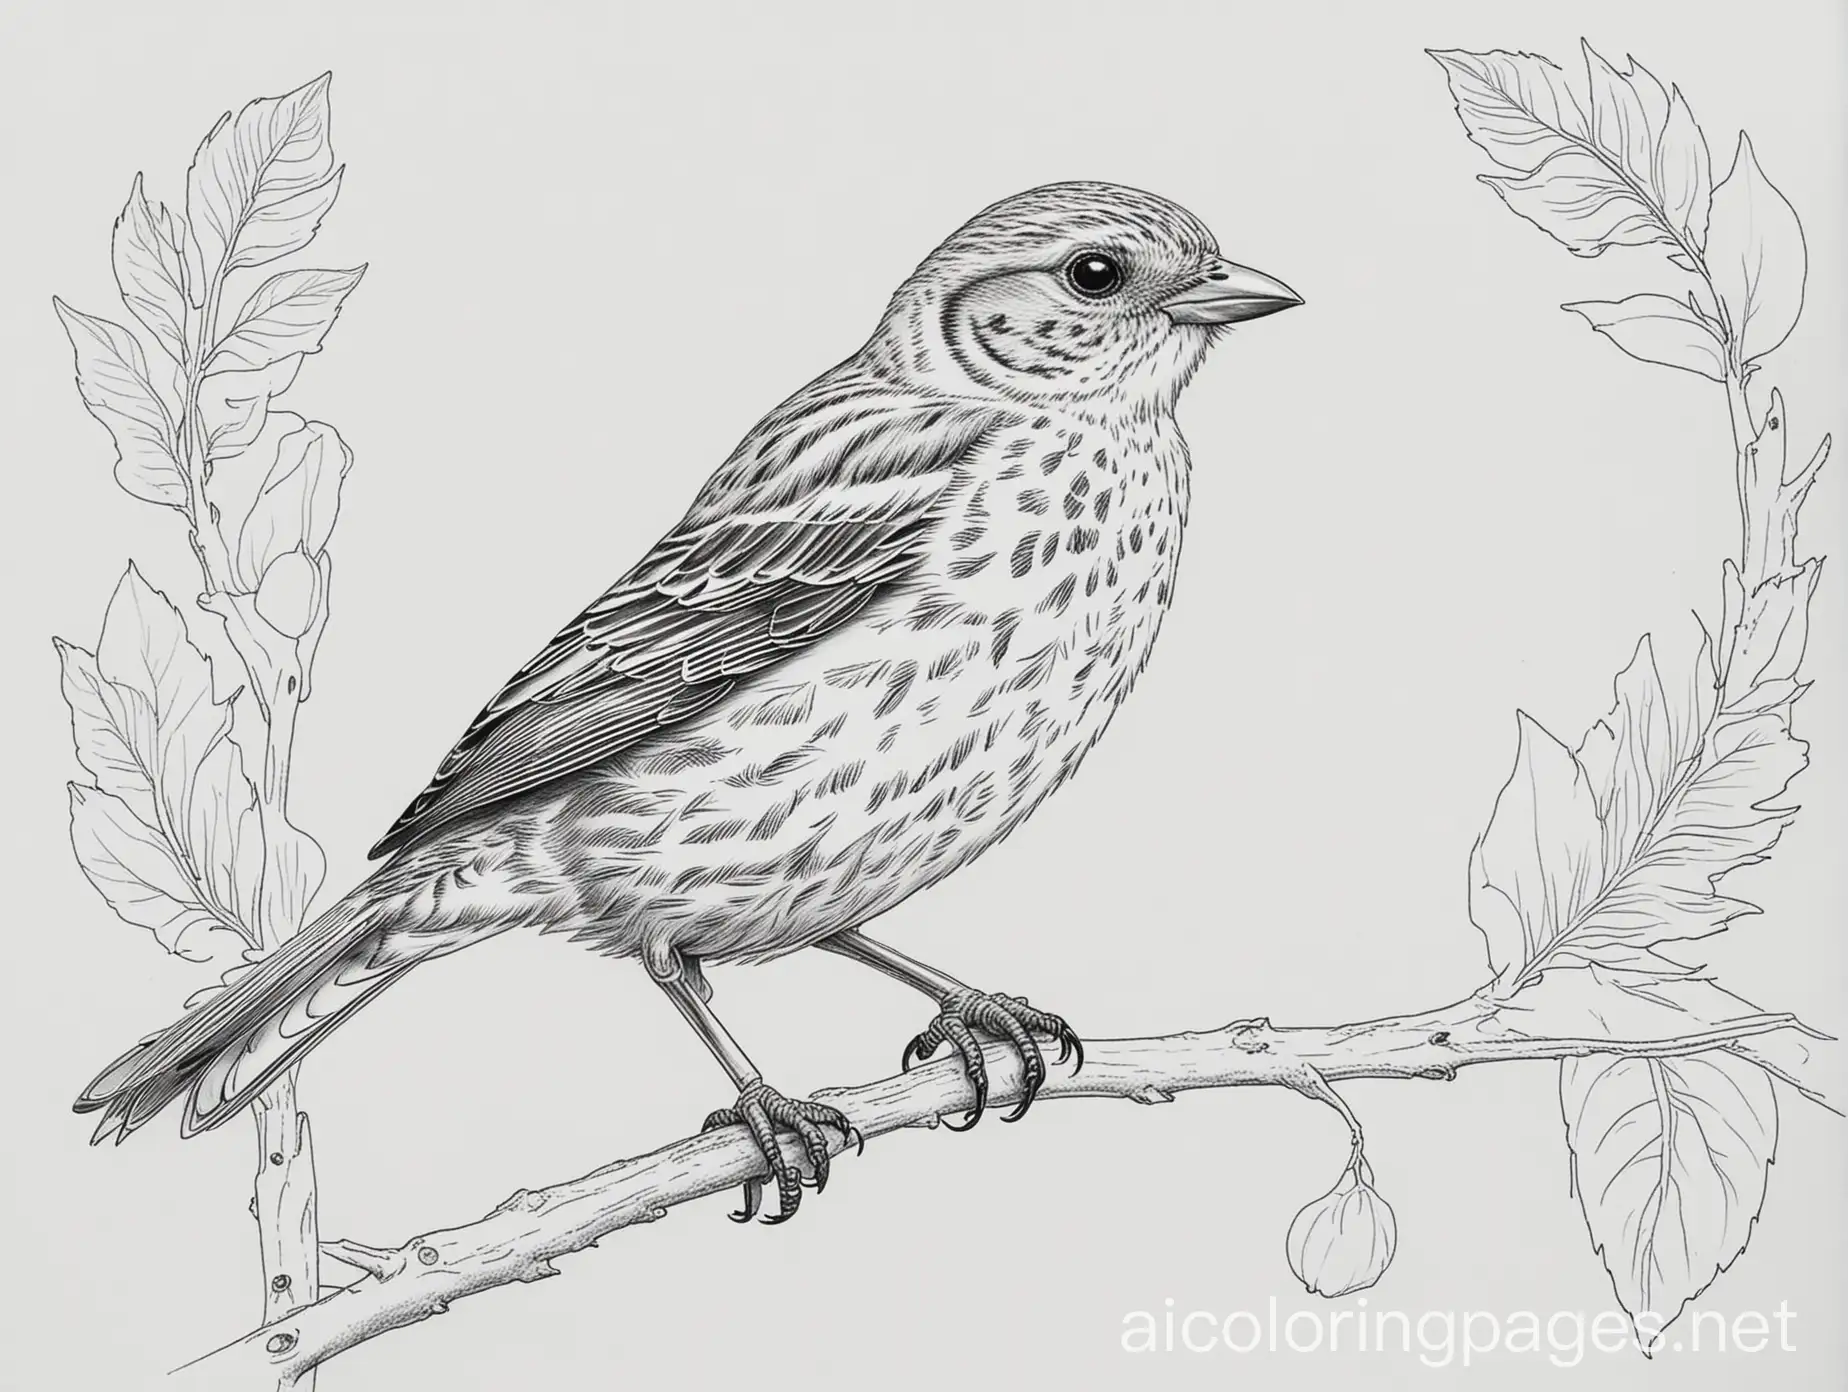 Yellowhammer , Coloring Page, black and white, line art, white background, Simplicity, Ample White Space. The background of the coloring page is plain white to make it easy for young children to color within the lines. The outlines of all the subjects are easy to distinguish, making it simple for kids to color without too much difficulty, Coloring Page, black and white, line art, white background, Simplicity, Ample White Space. The background of the coloring page is plain white to make it easy for young children to color within the lines. The outlines of all the subjects are easy to distinguish, making it simple for kids to color without too much difficulty